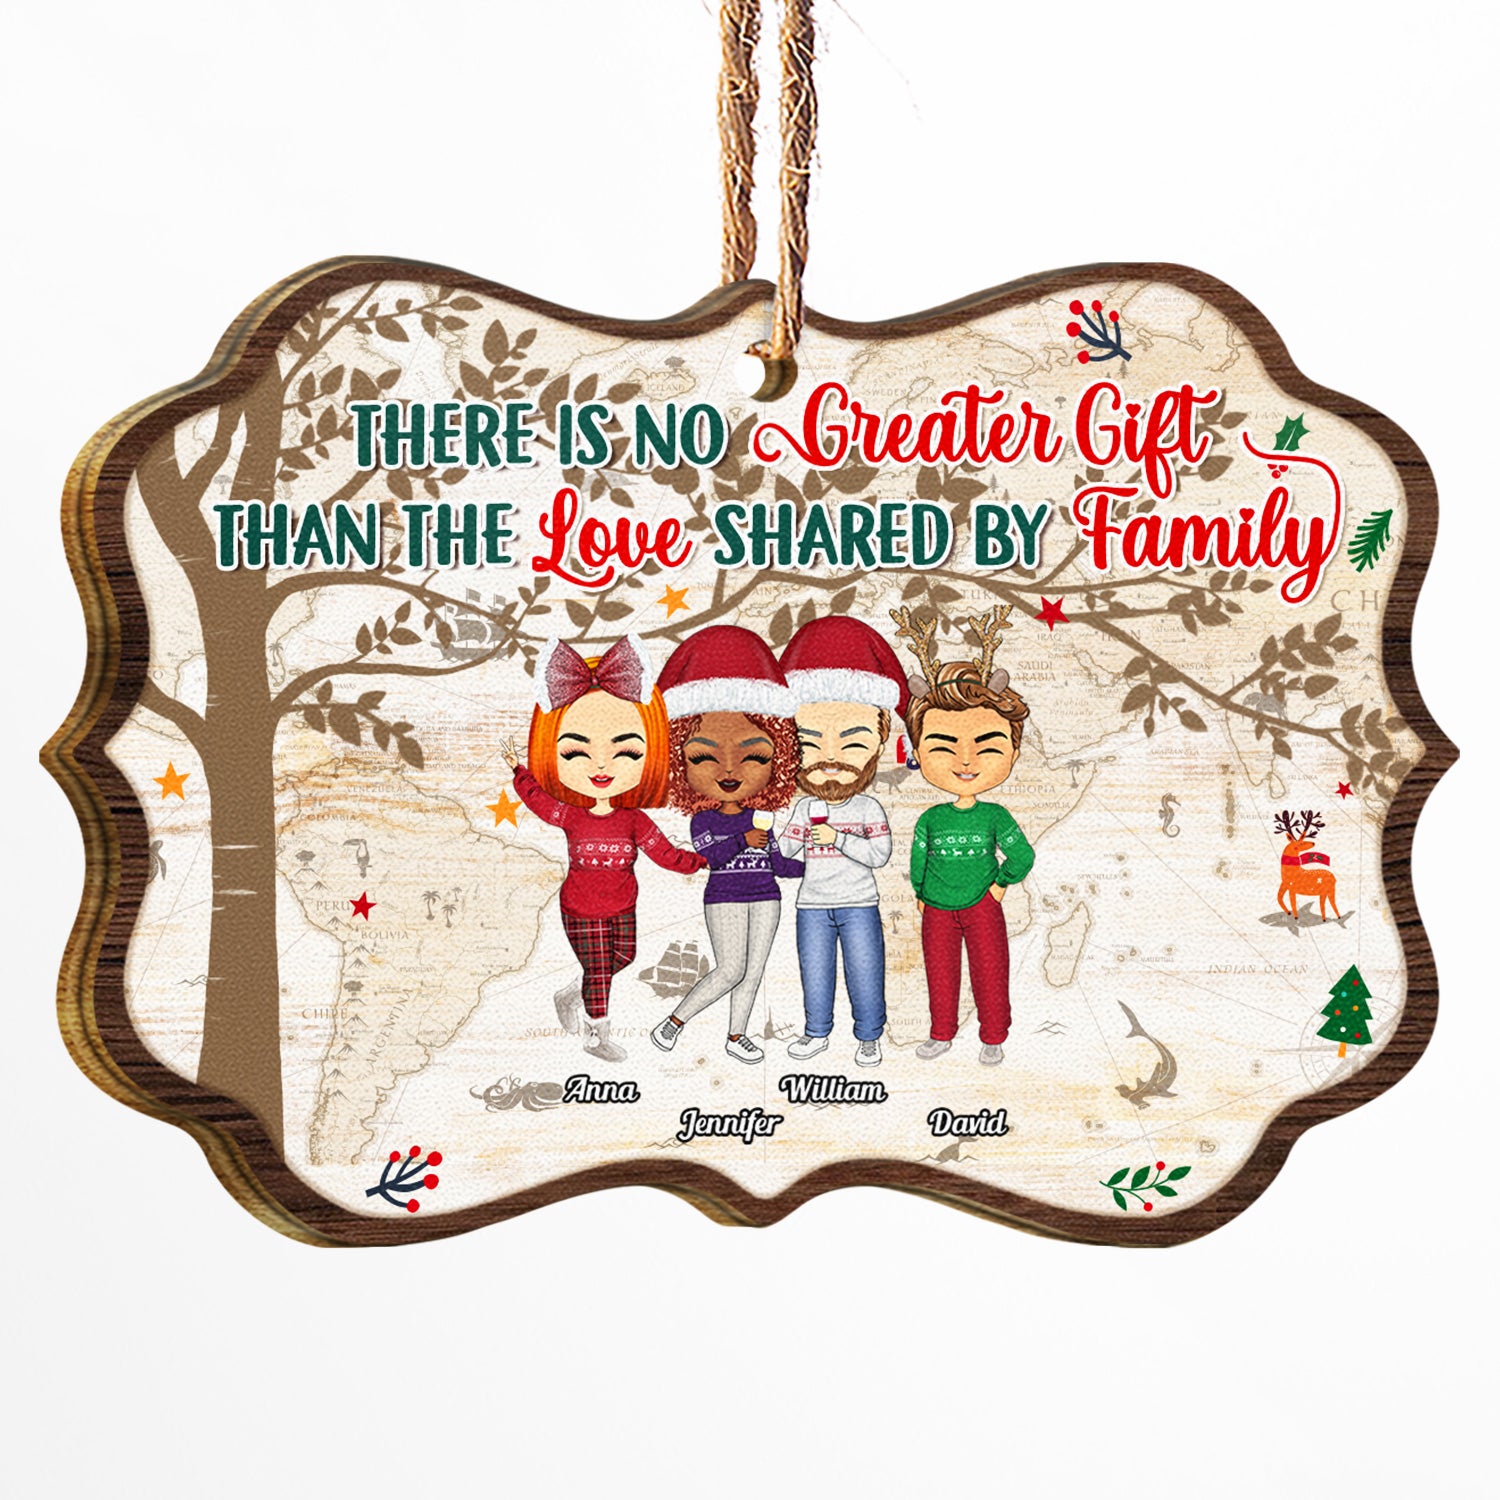 Shared By A Family - Gift For Family - Personalized Custom Wooden Ornament